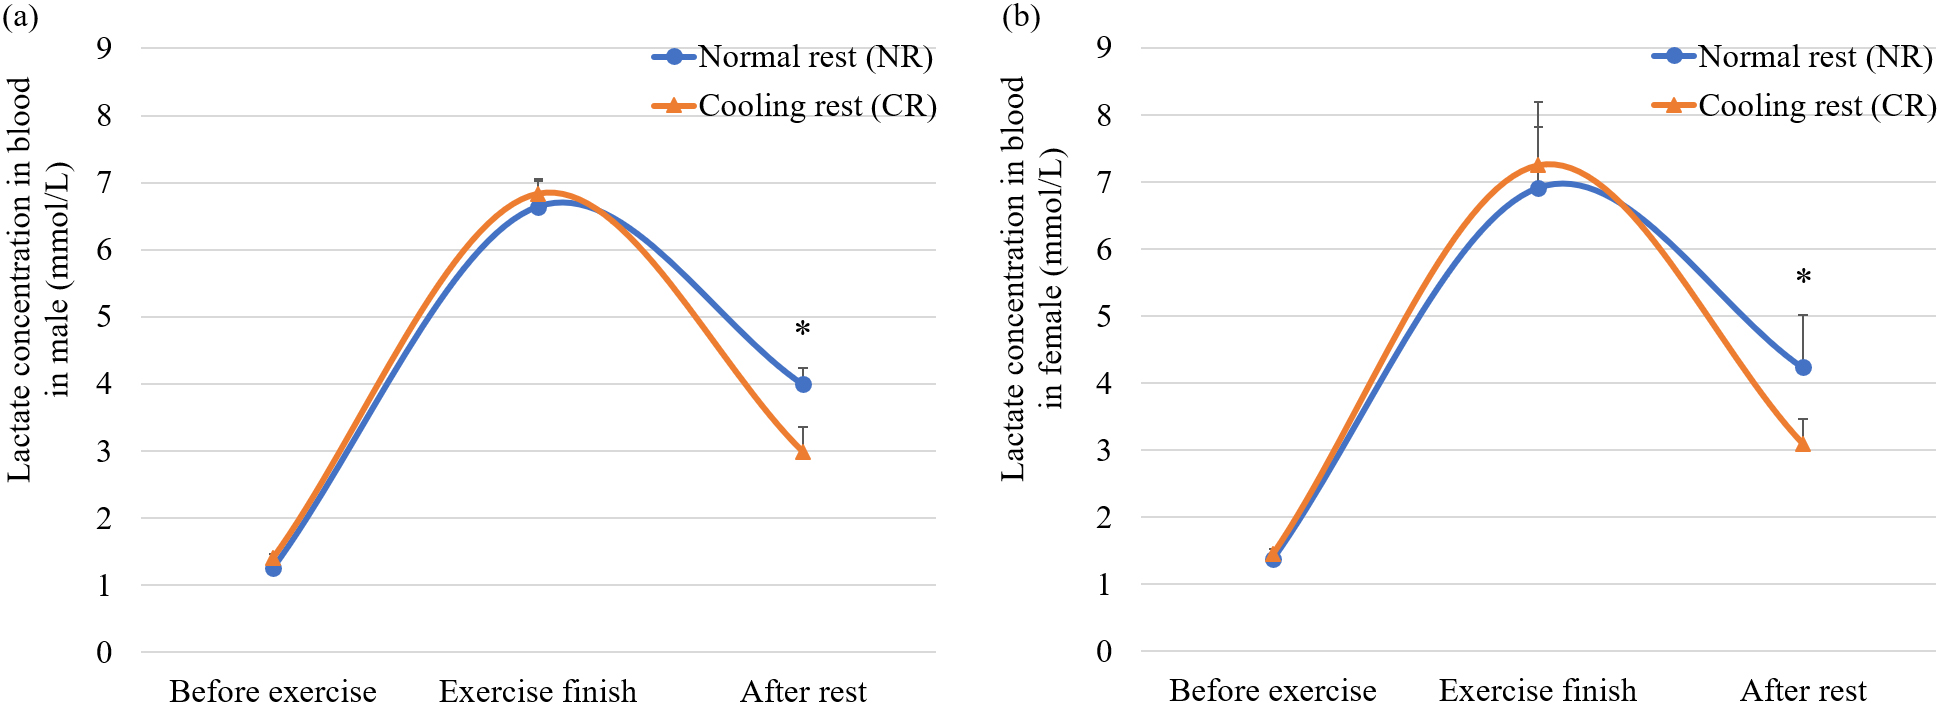 Lactate concentration (mean ± SD) of (a) males and (b) females with normal rest and cooling rest. Asterisk denotes significant differences with the control group at P< 0.05.